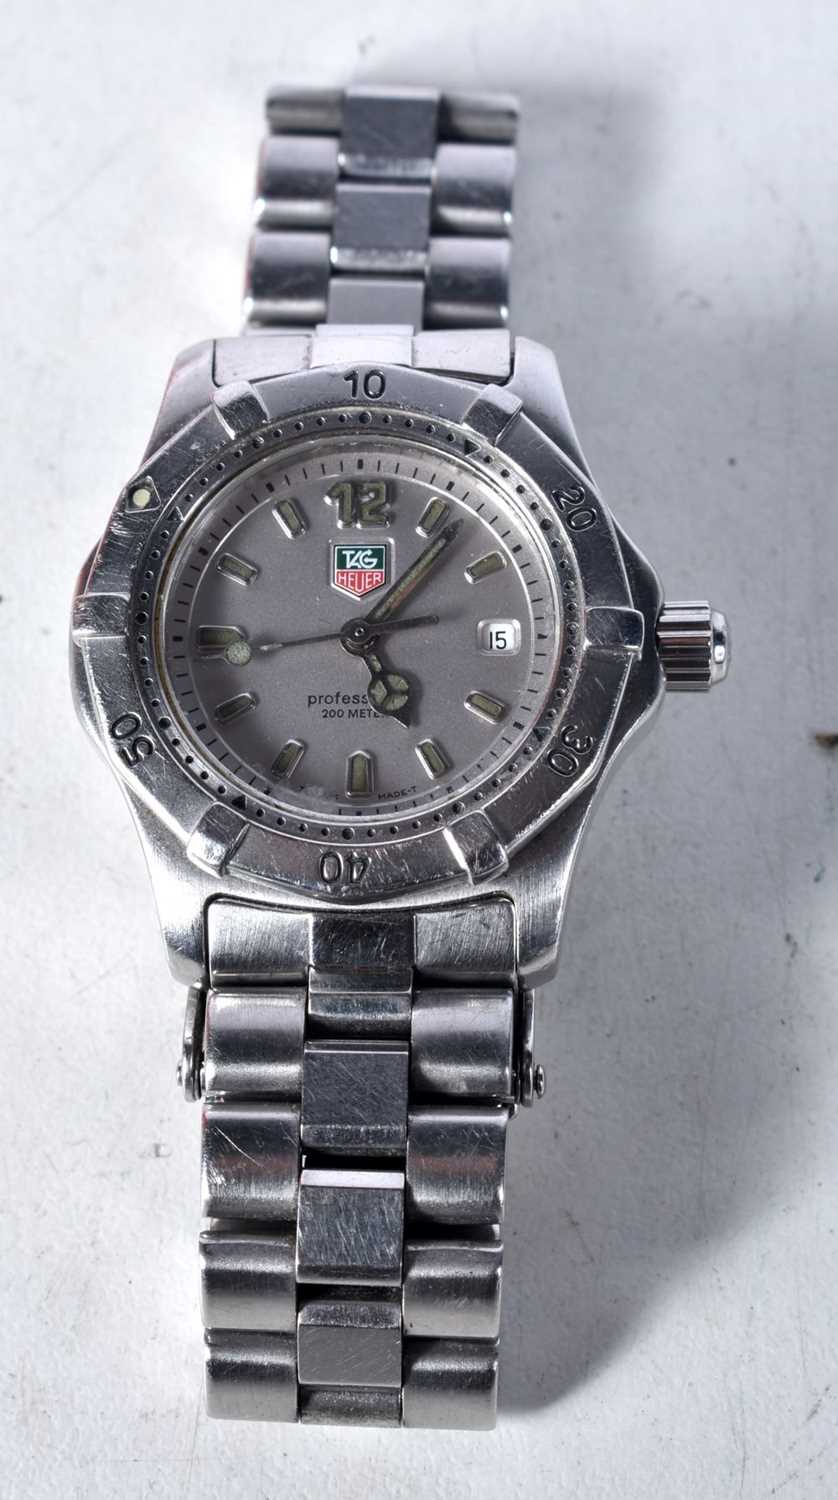 TAG Heuer Professional 200 Meter White Dial Watch.  Dial 3.2cm incl crown, working